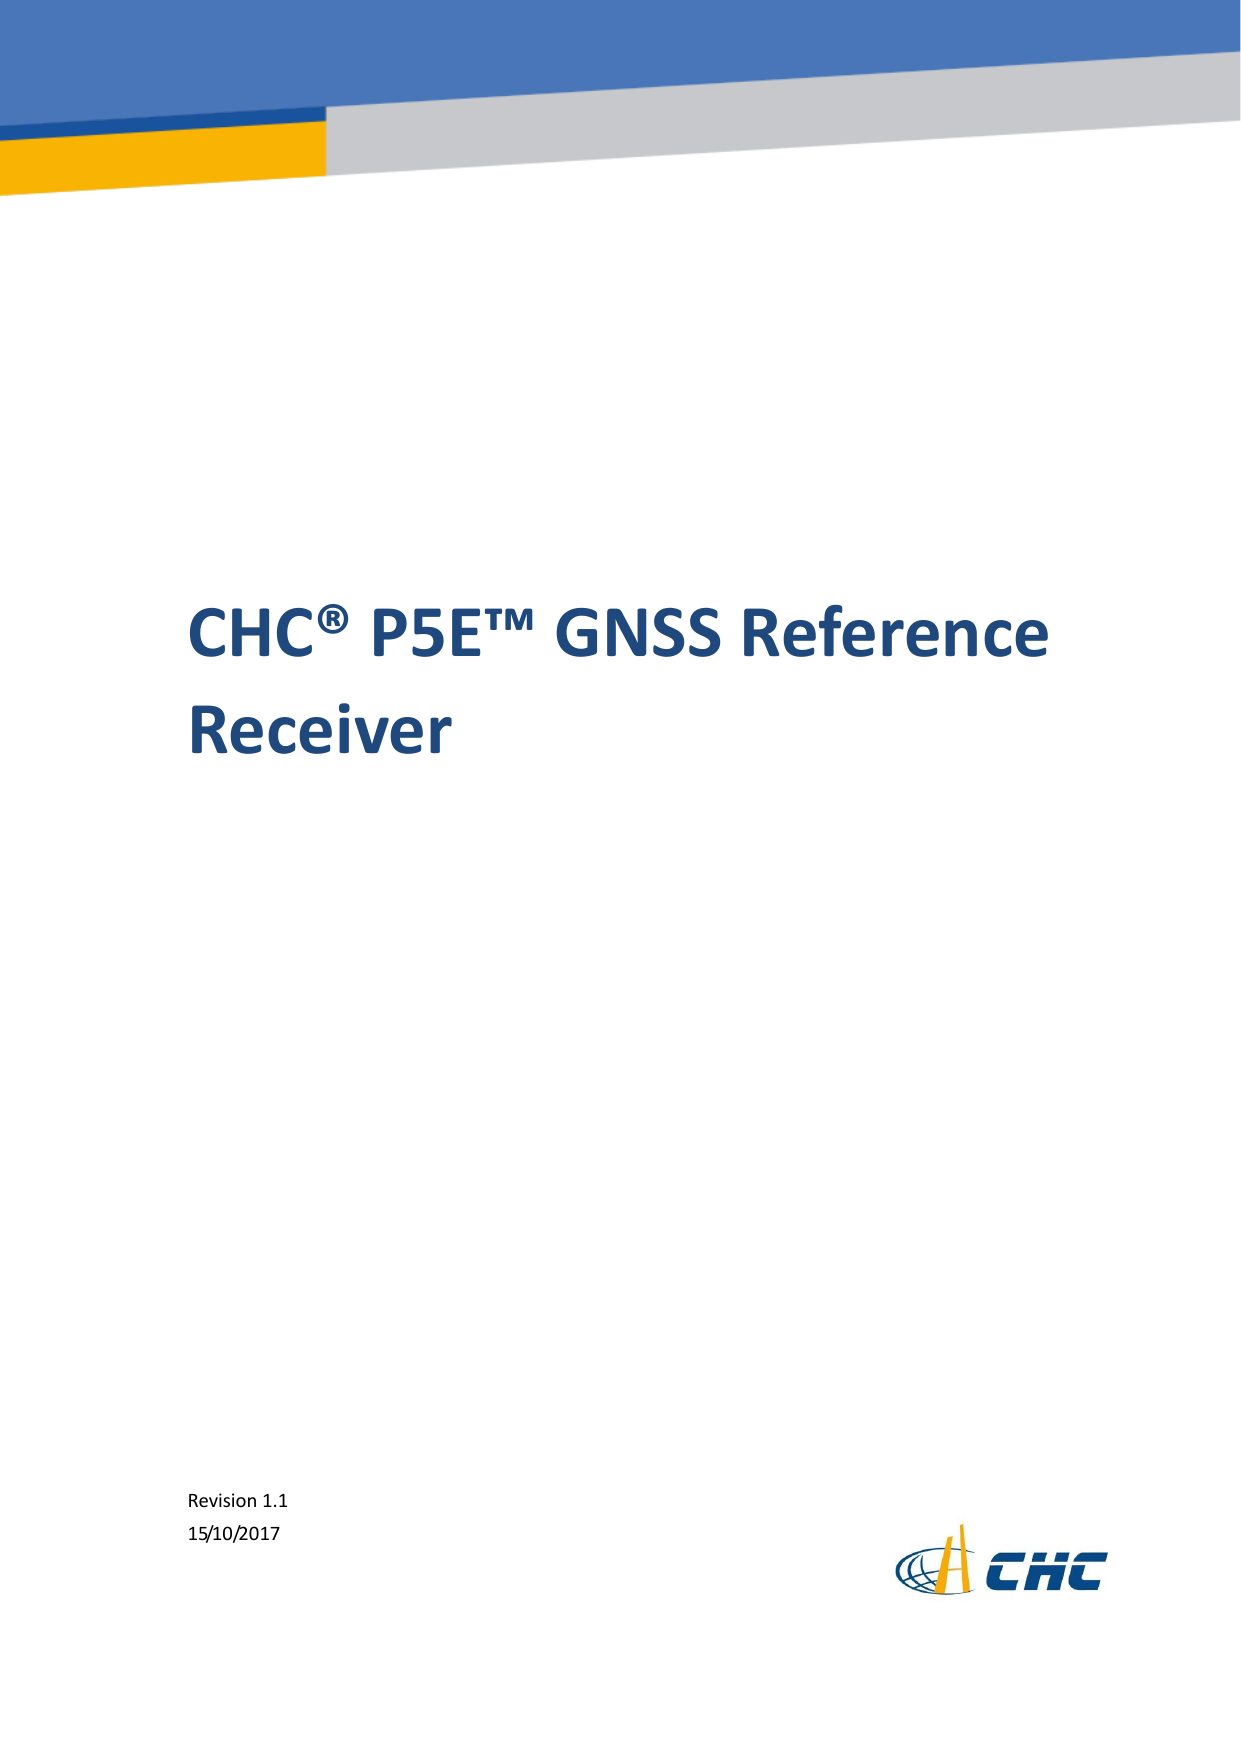 Safety Information il CHC® P5E™ GNSS Reference Receiver Revision 1.1 15/10/2017 